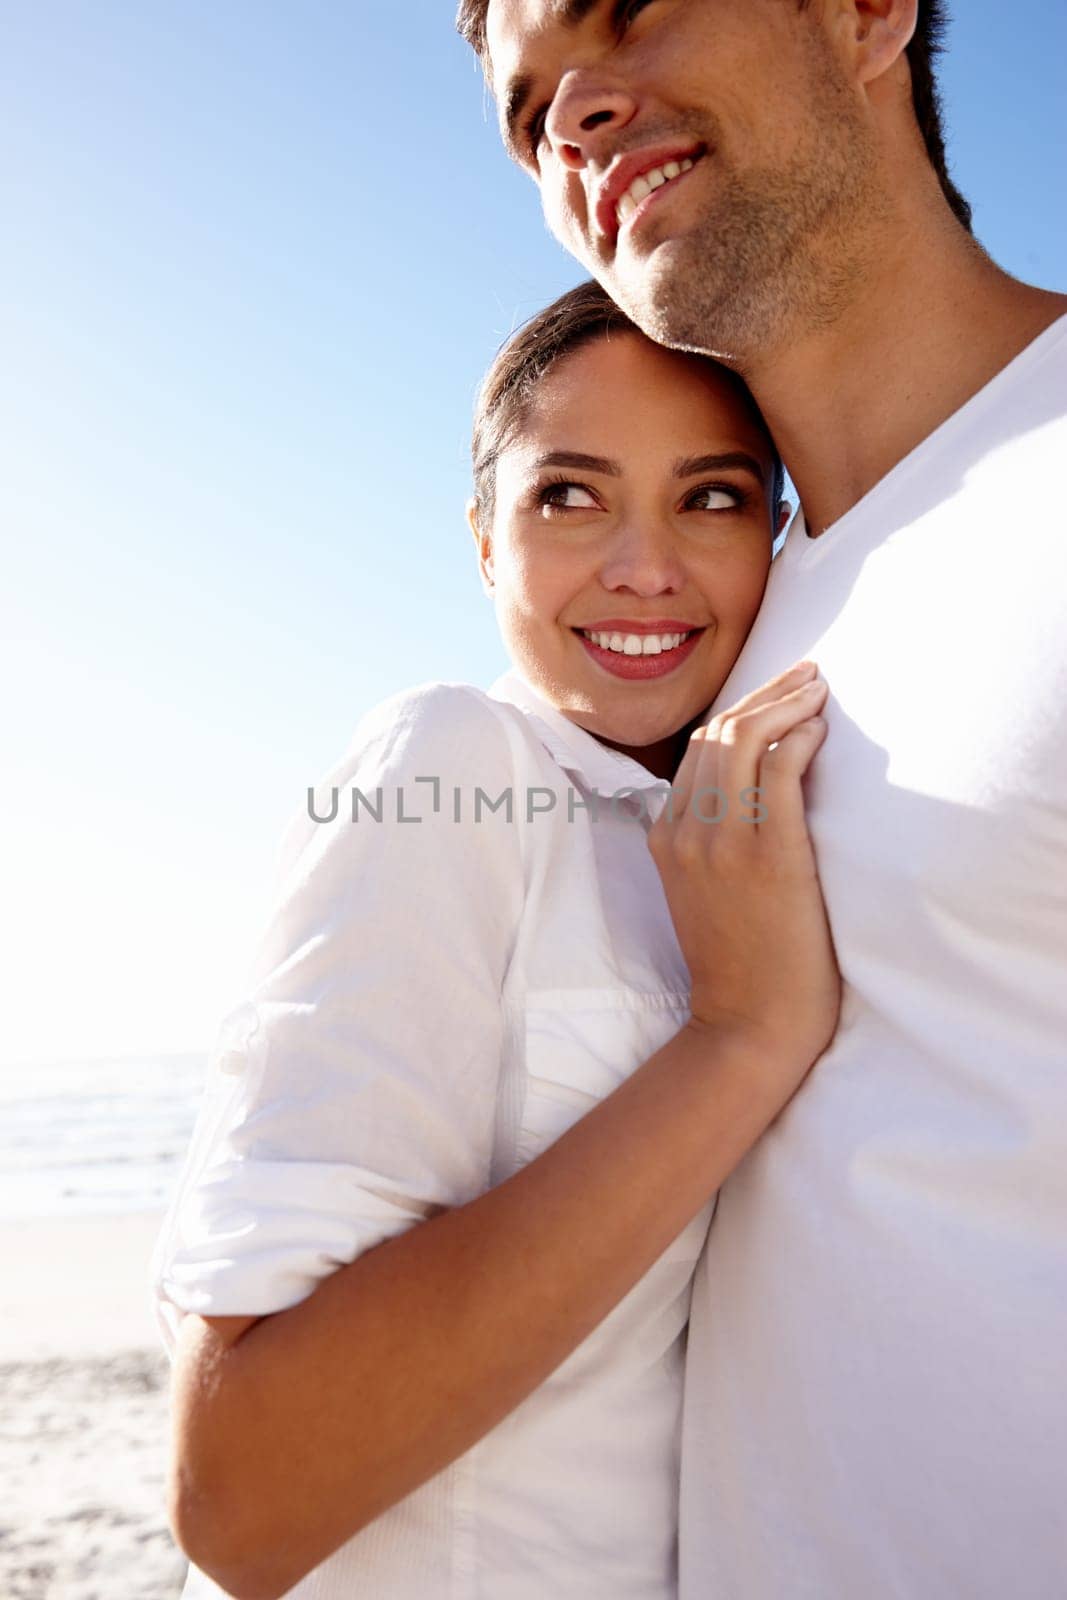 Happy, hug and couple on beach on holiday for bonding, relax together and relationship by ocean. Dating, travel and man and woman embrace for romance on anniversary, vacation and weekend in nature.